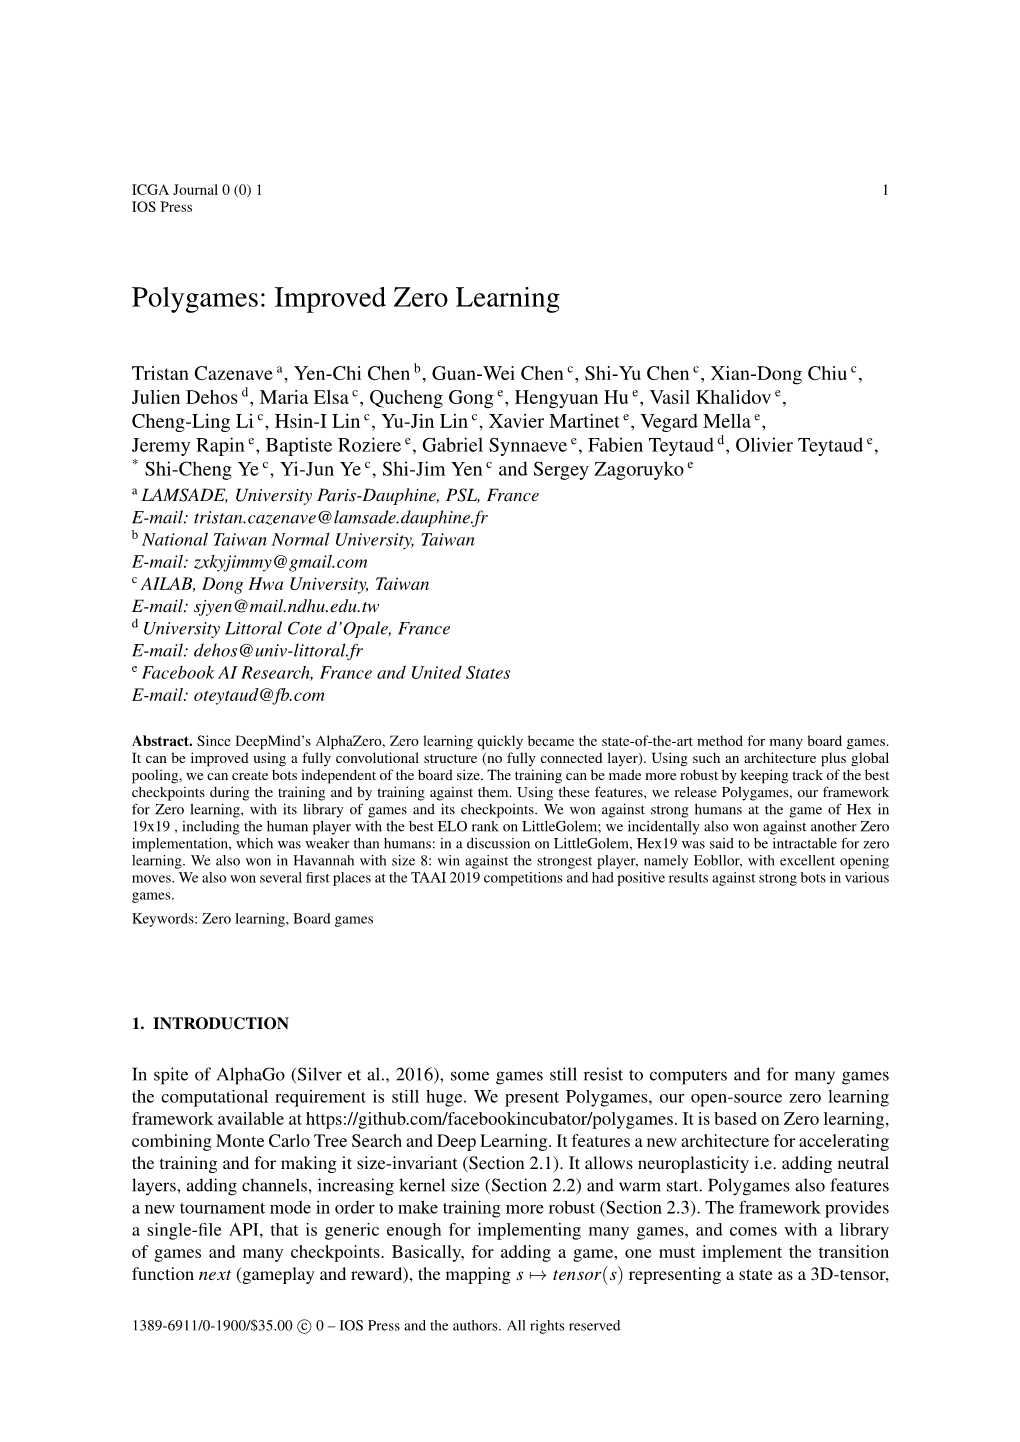 Polygames: Improved Zero Learning